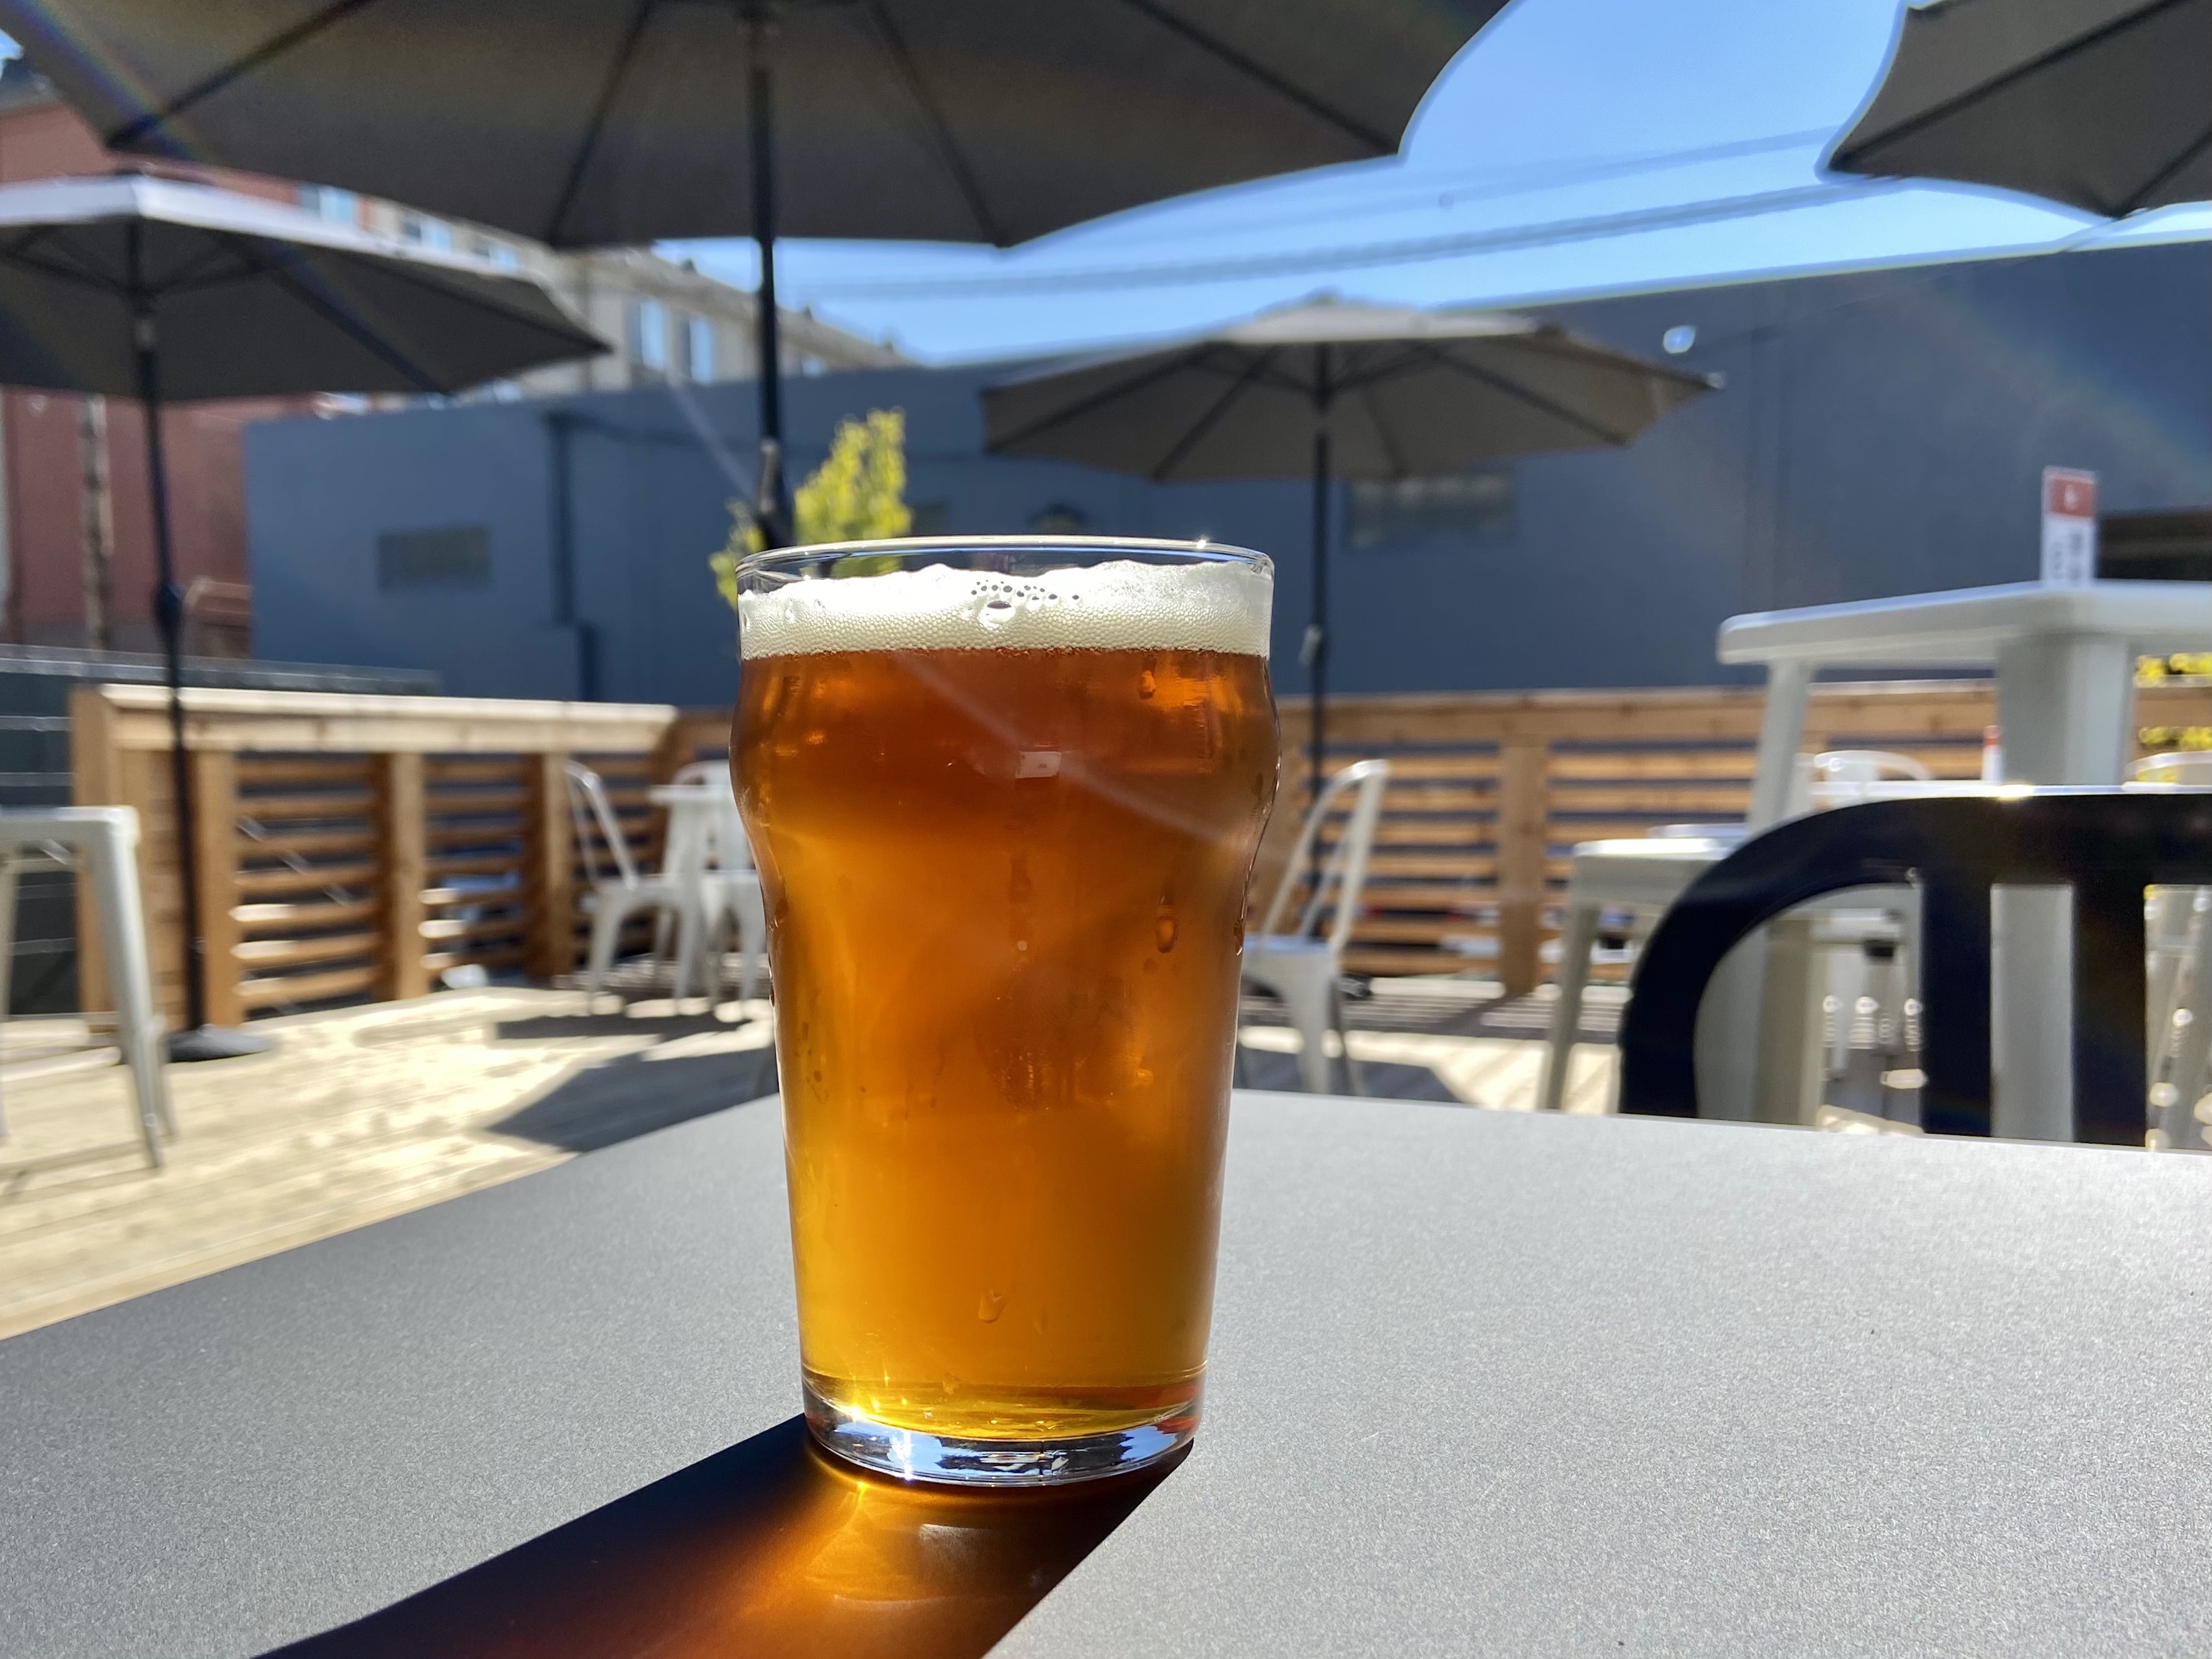 The IPA from Hammer & Stitch Brewing with a view of the outdoor deck.